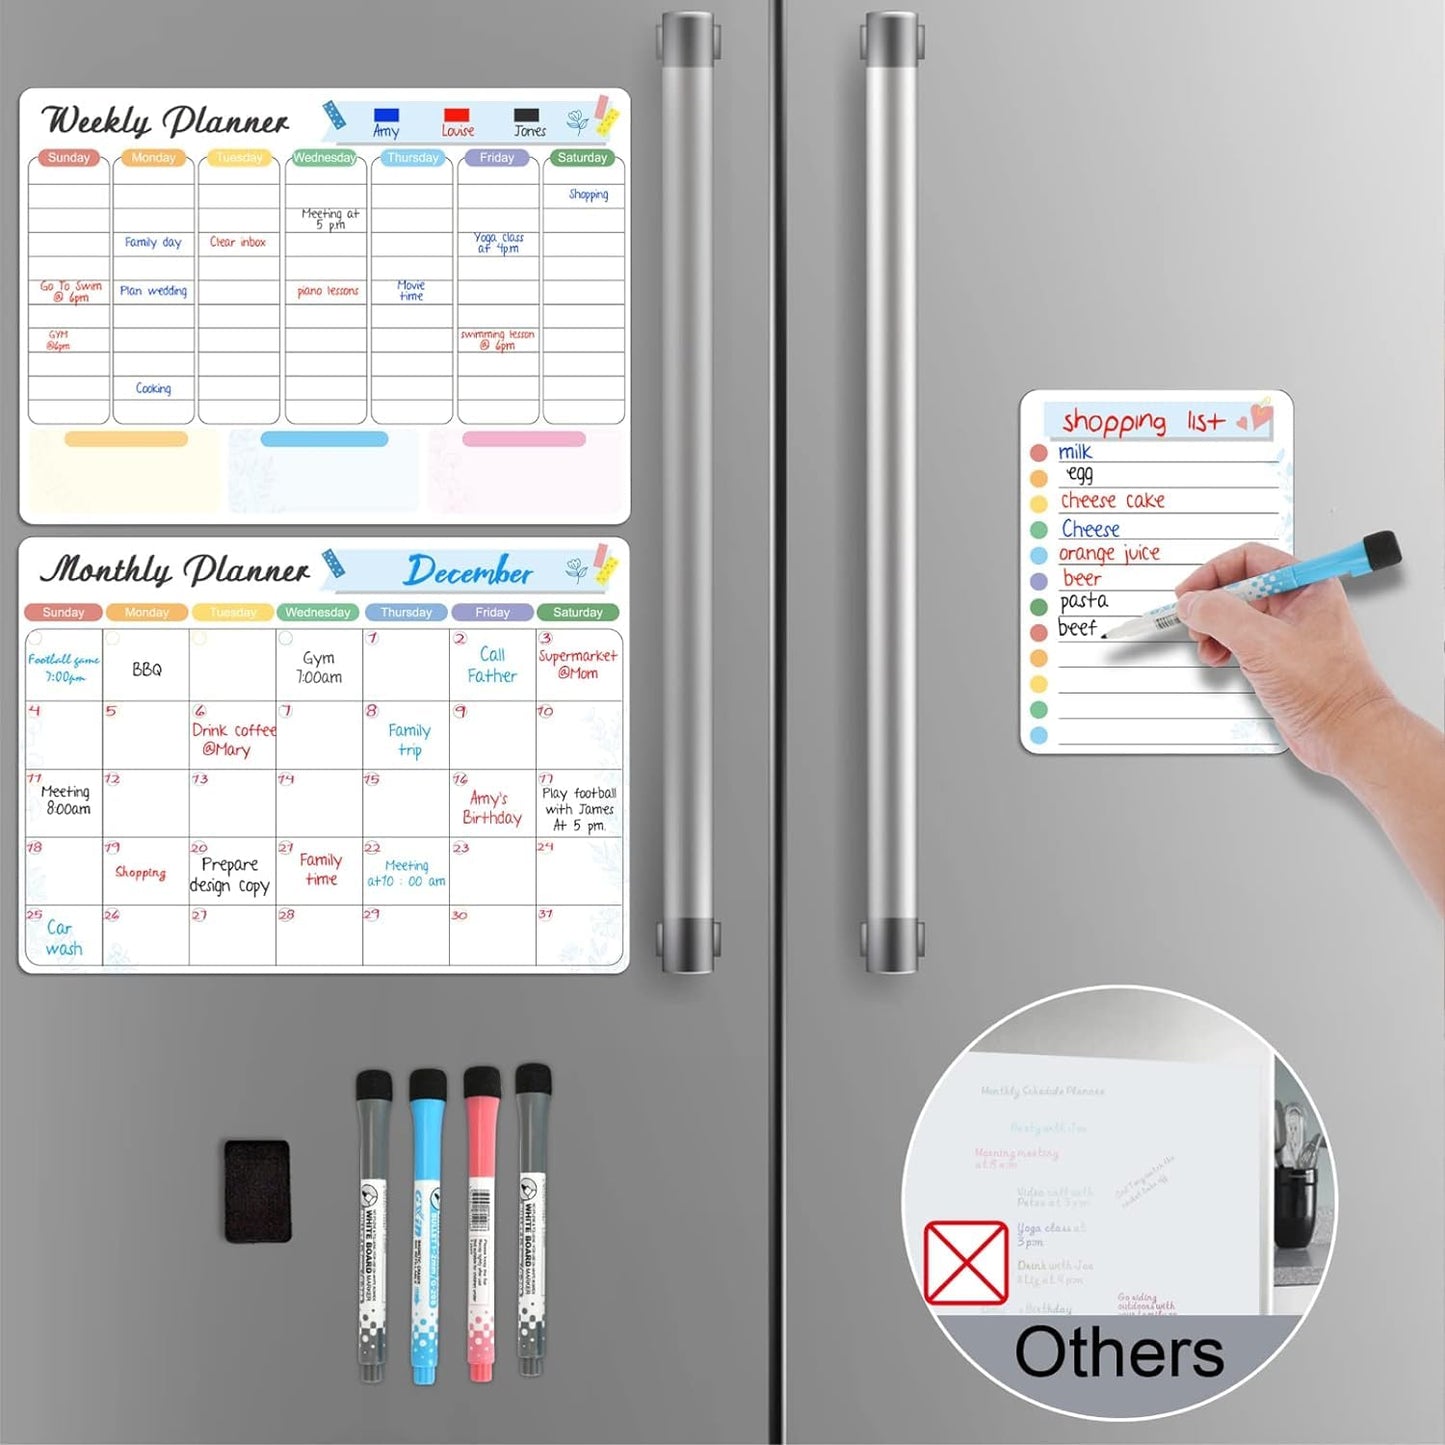 Magnetic White board Refrigerator Calendar set- Weekly and Monthly Planner, Wall, and Fridge Includes Shopping list & 4 markers